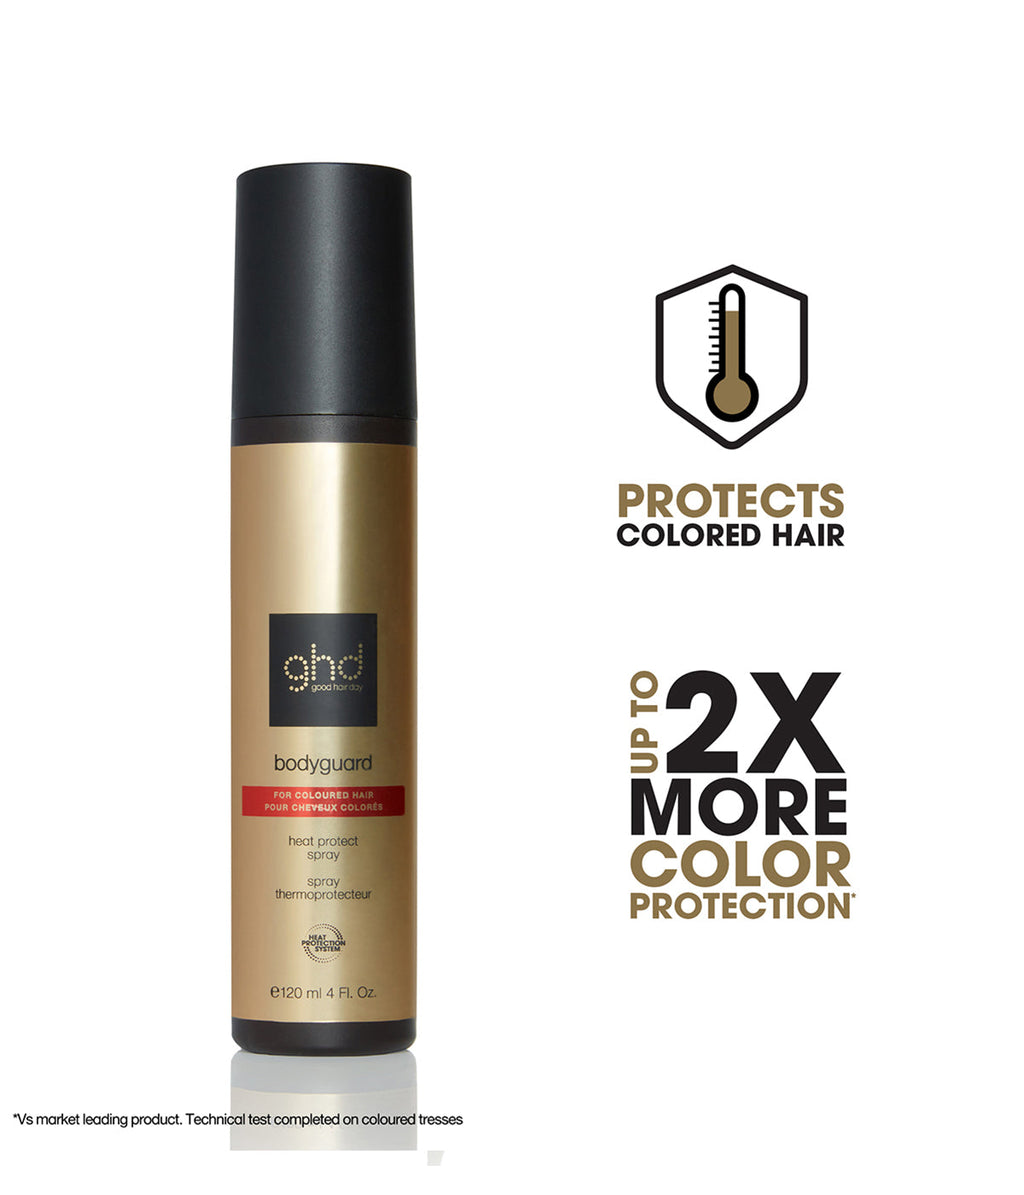 ghd bodyguard heat protection, for colored hair